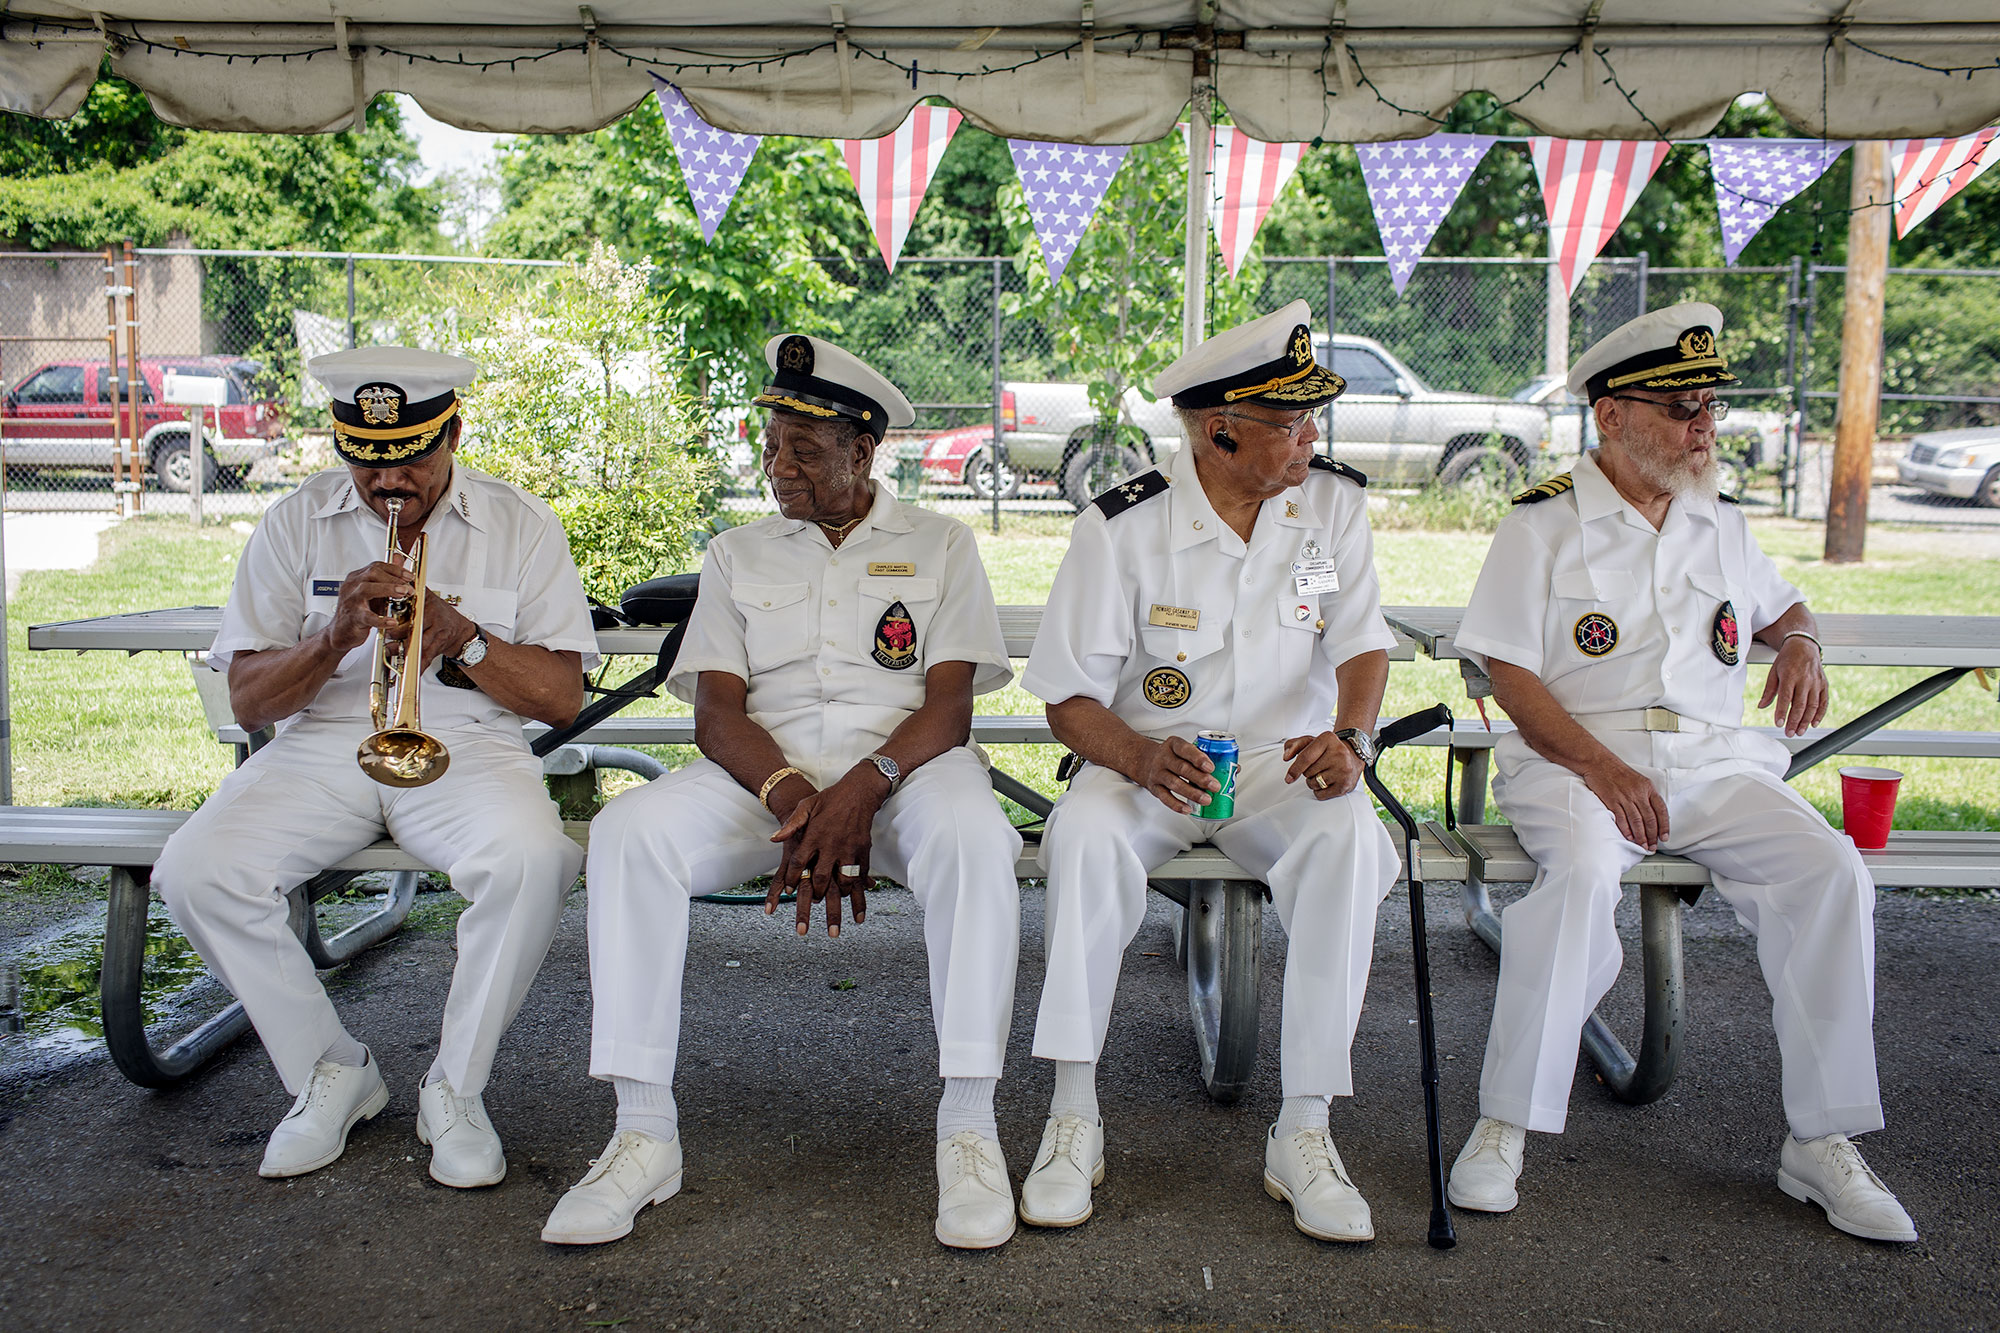  Joseph Quarterman (left), Bob Martin, Howard Gasaway, and Chubby Martin wear their Captain's uniforms as they prepare for the annual flag raising ceremony in June, 2016. 